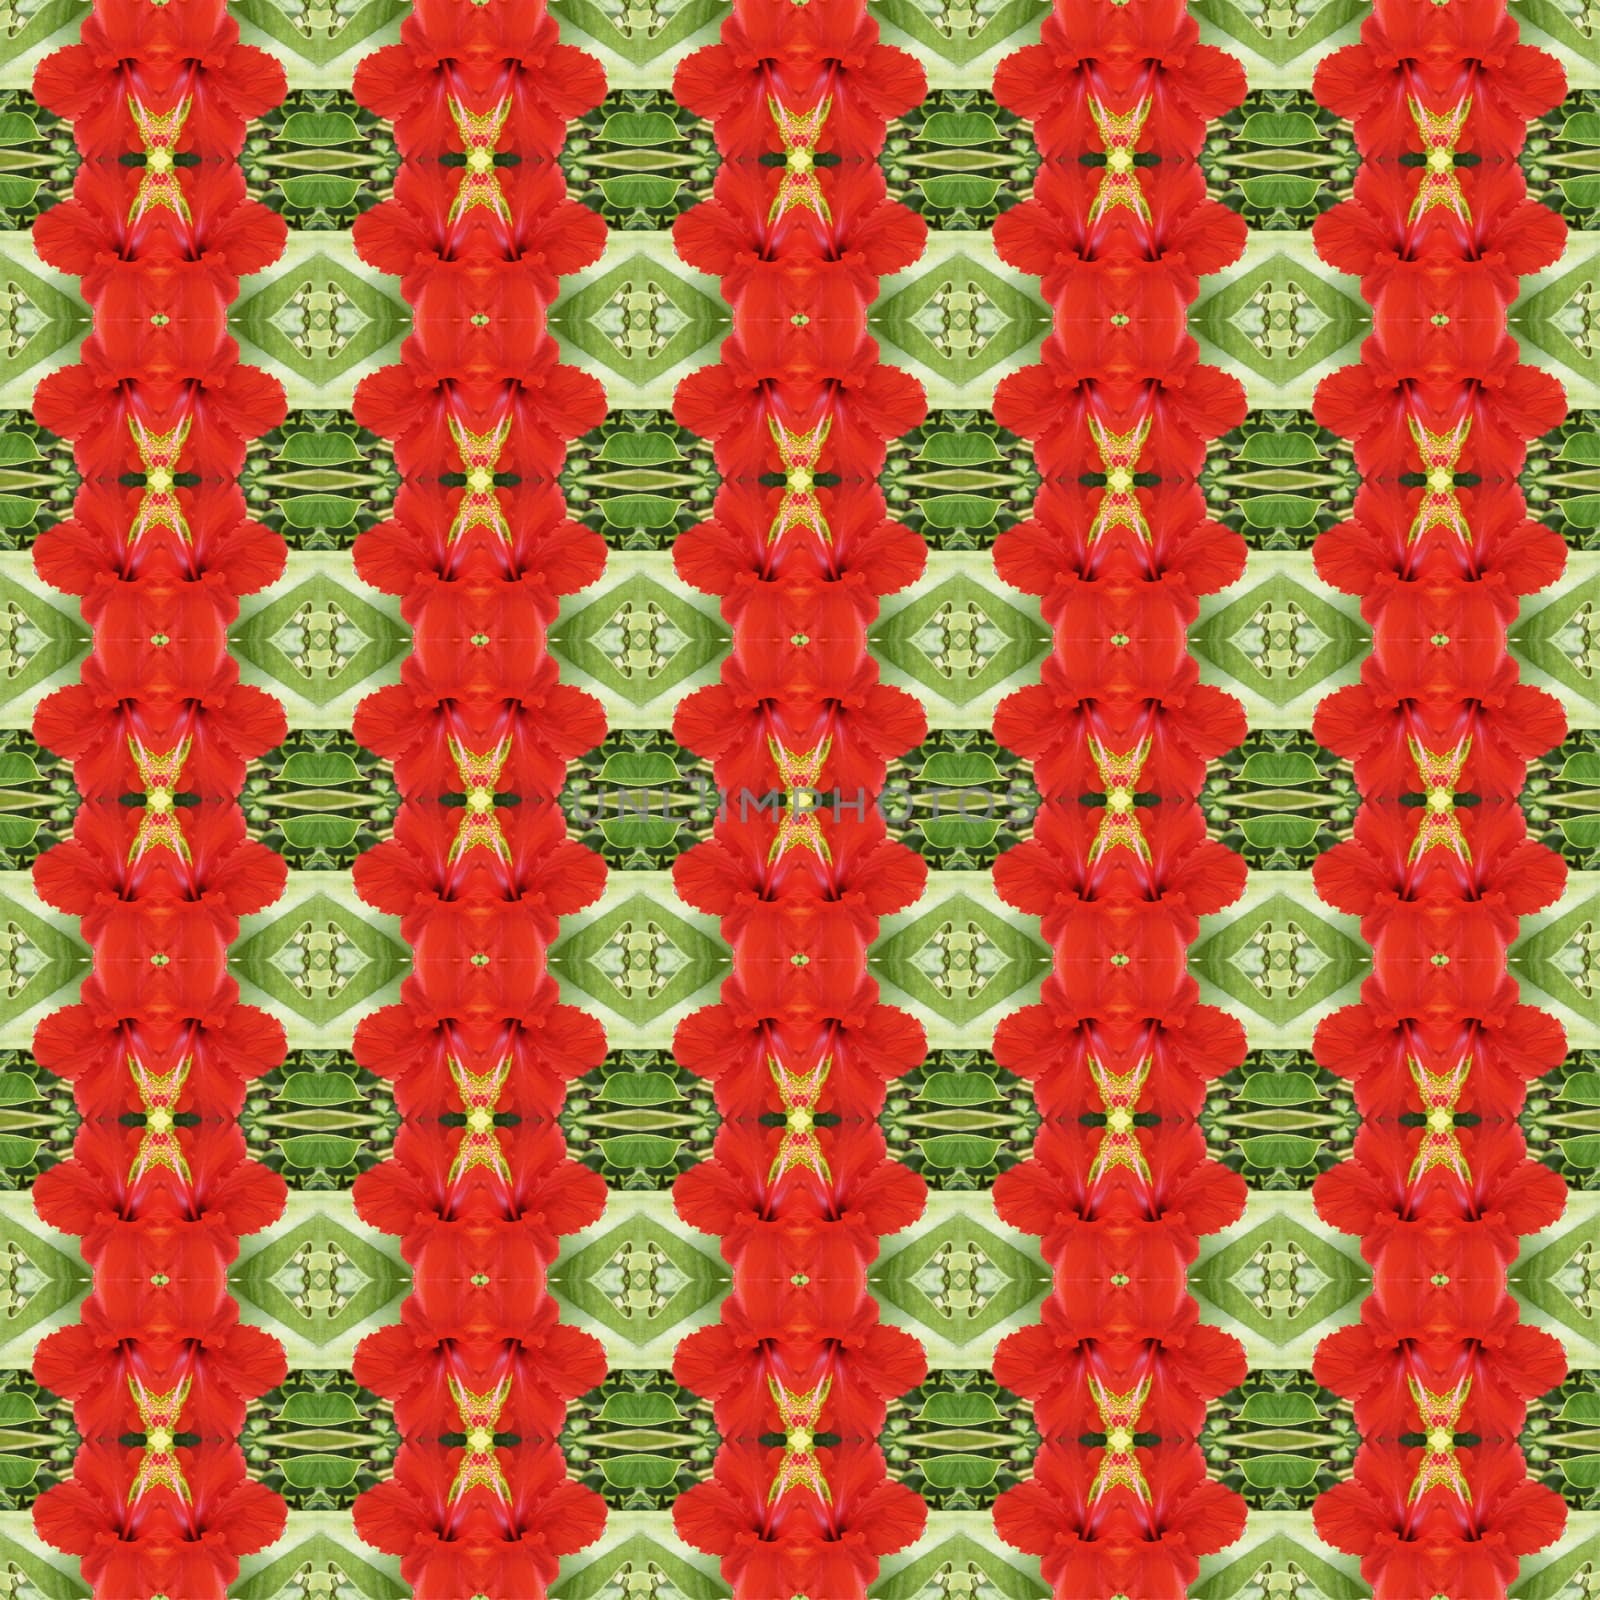 Full bloom of red hibiscus flower seamless use as pattern and wallpaper.